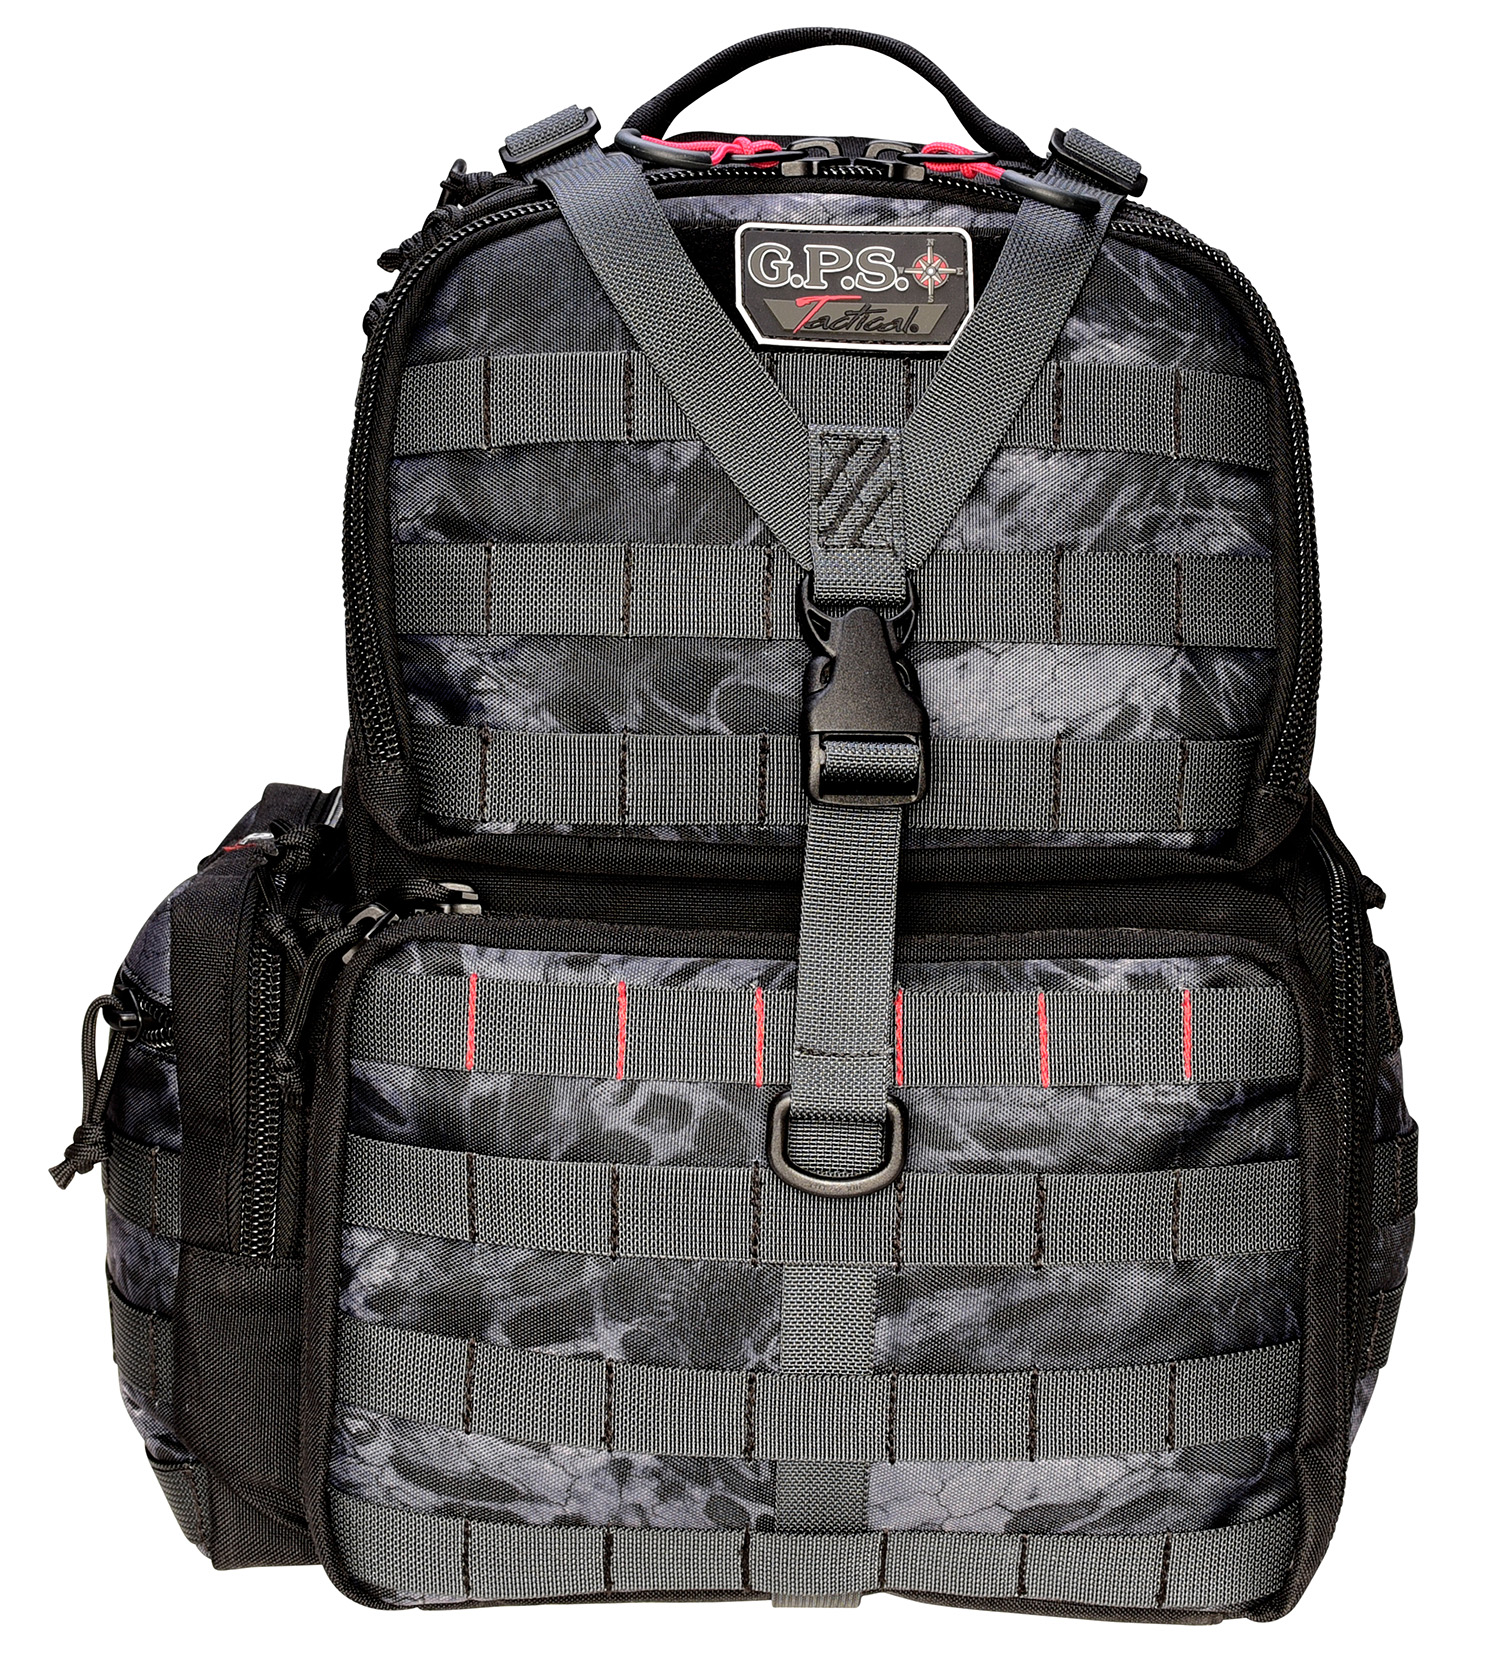 G*Outdoors GPS-T1612BPP Tactical Range Backpack PRYM1 Blackout 1000D Polyester with Removable Pistol Storage, Visual ID Storage System & Lockable Zippers Holds 3 Handguns, Ammo & Accessories